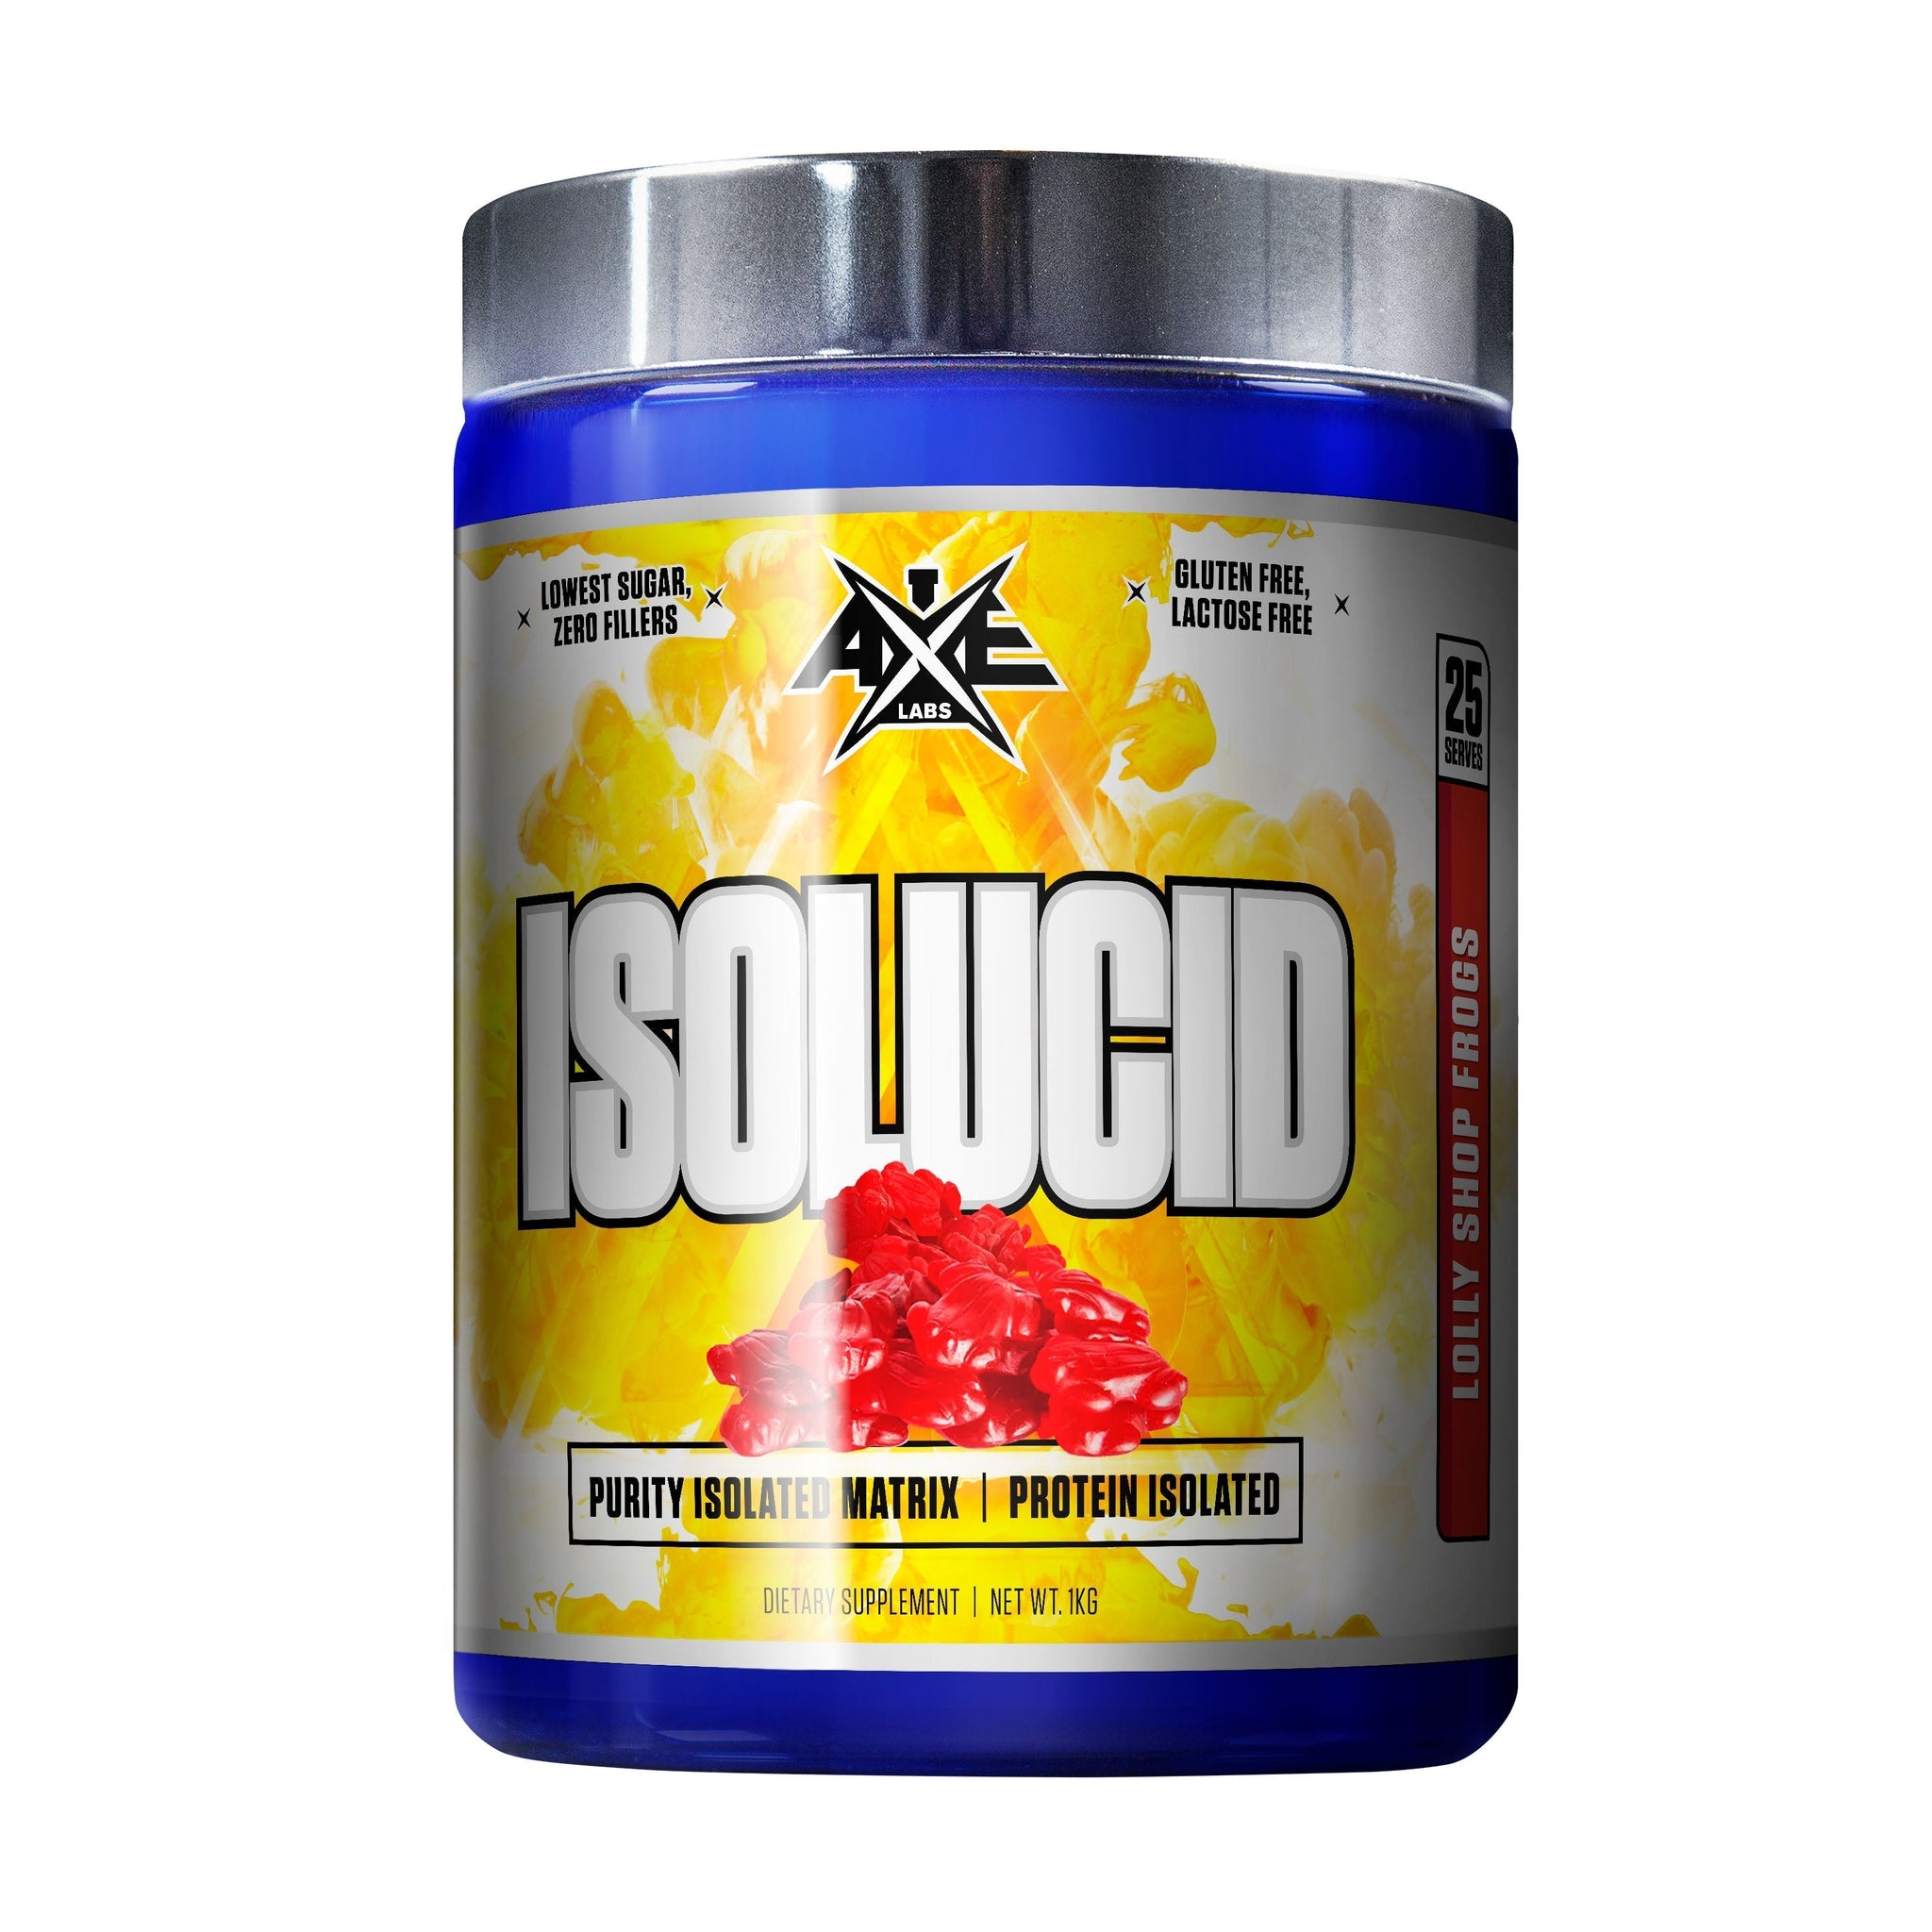 ISOLUCID SAMPLE - $10.00 INCLUDING EXPRESS SHIPPING